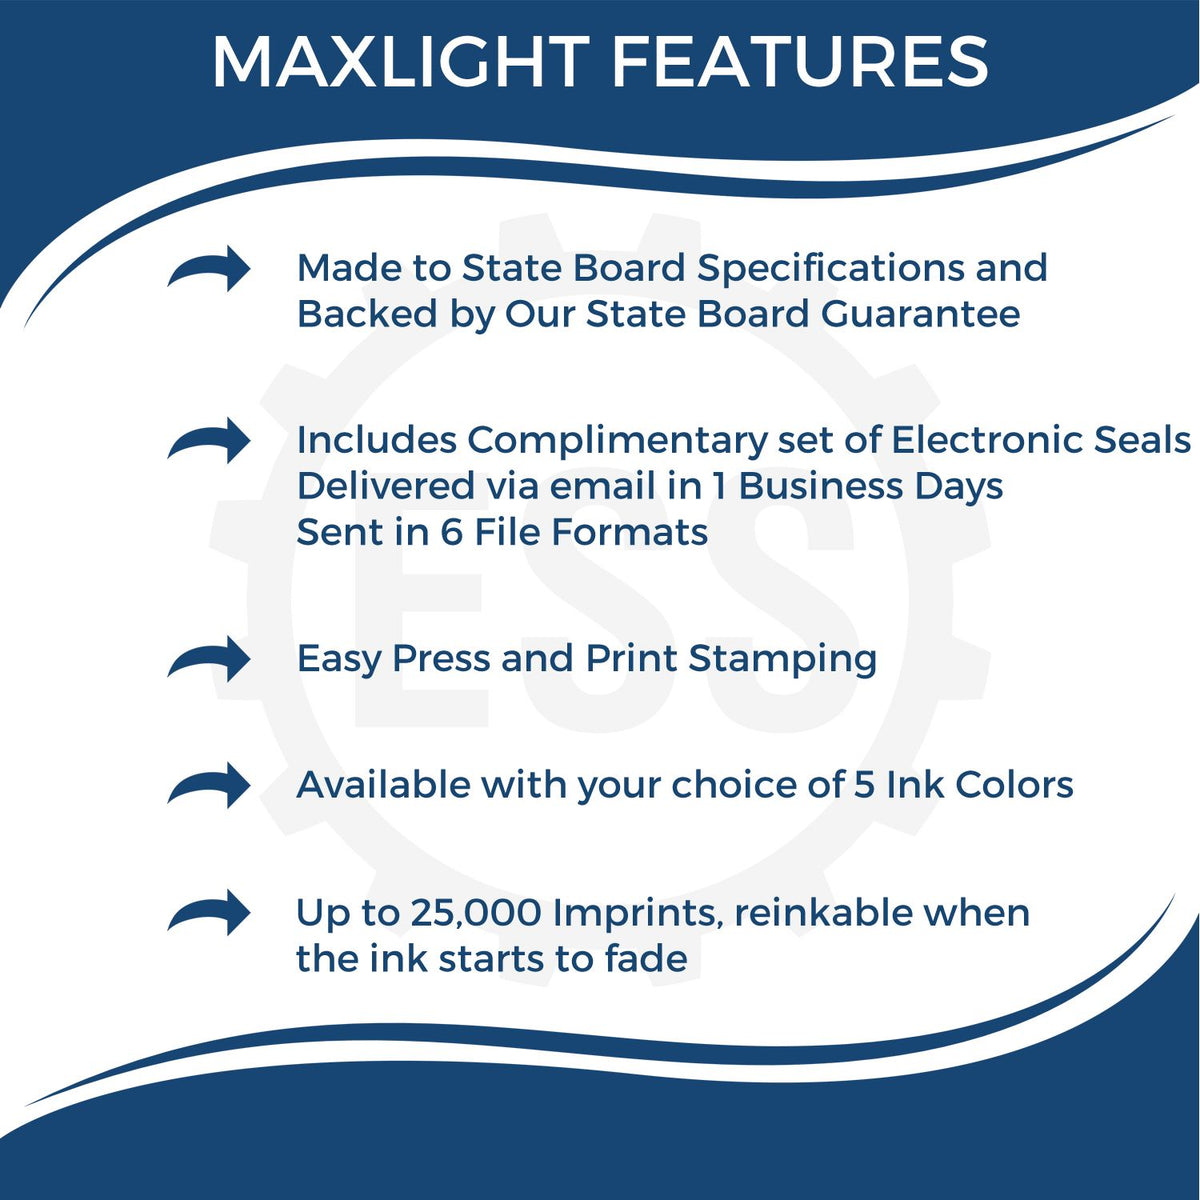 A picture of an infographic highlighting the selling points for the Premium MaxLight Pre-Inked Massachusetts Geology Stamp